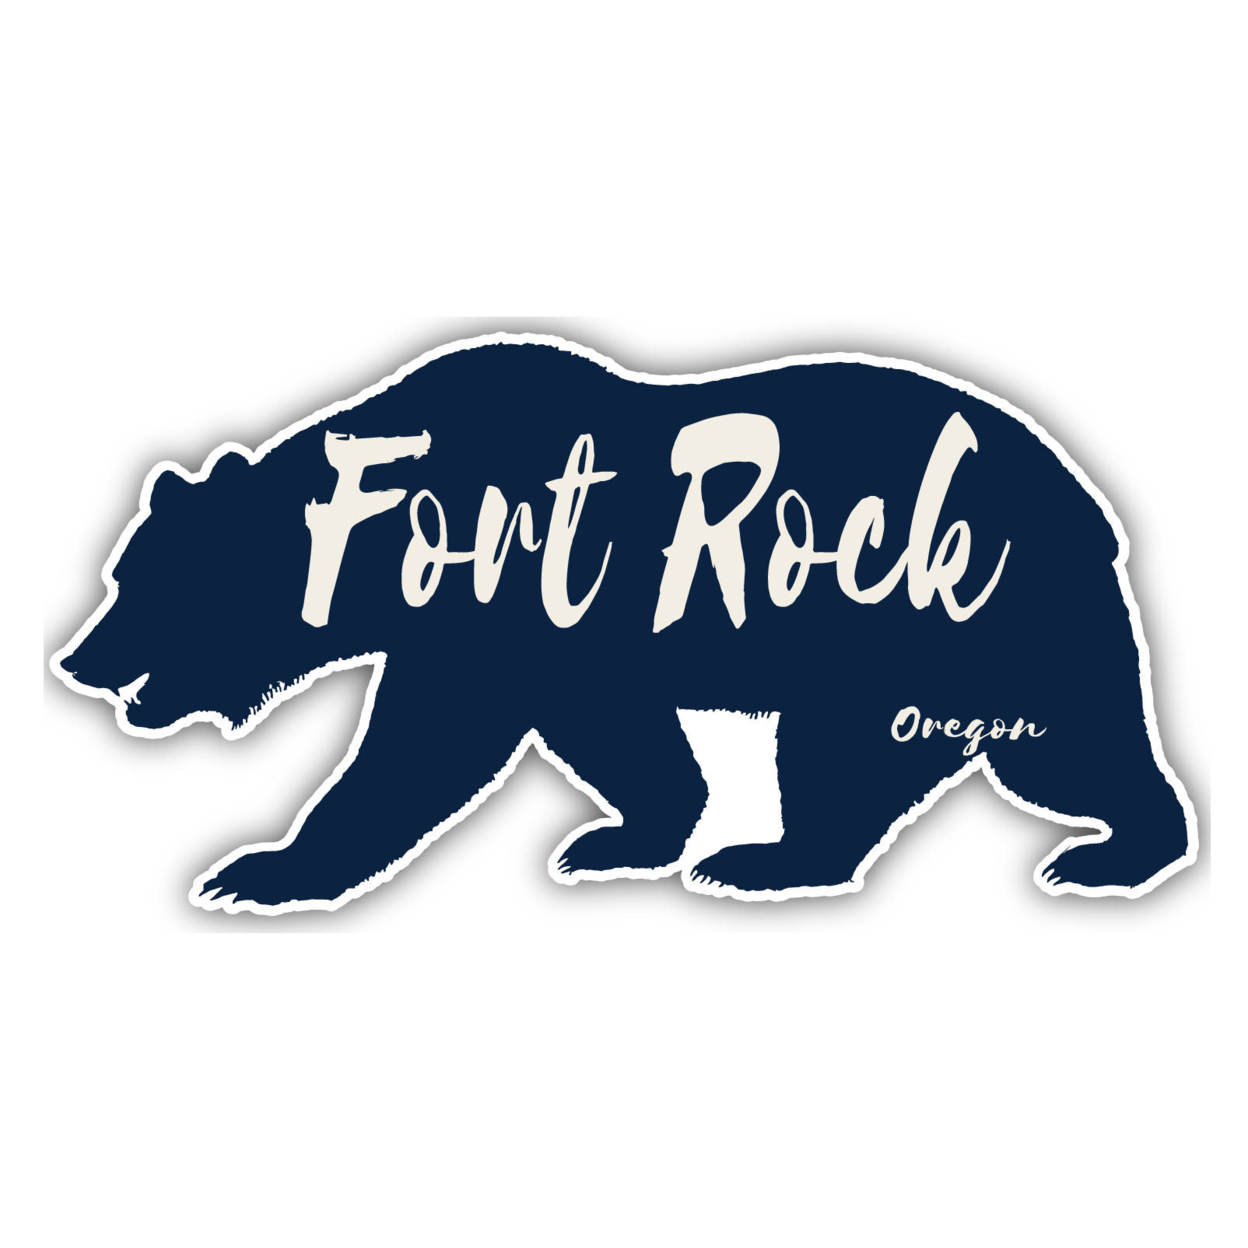 Fort Rock Oregon Souvenir Decorative Stickers (Choose Theme And Size) - 4-Pack, 6-Inch, Bear